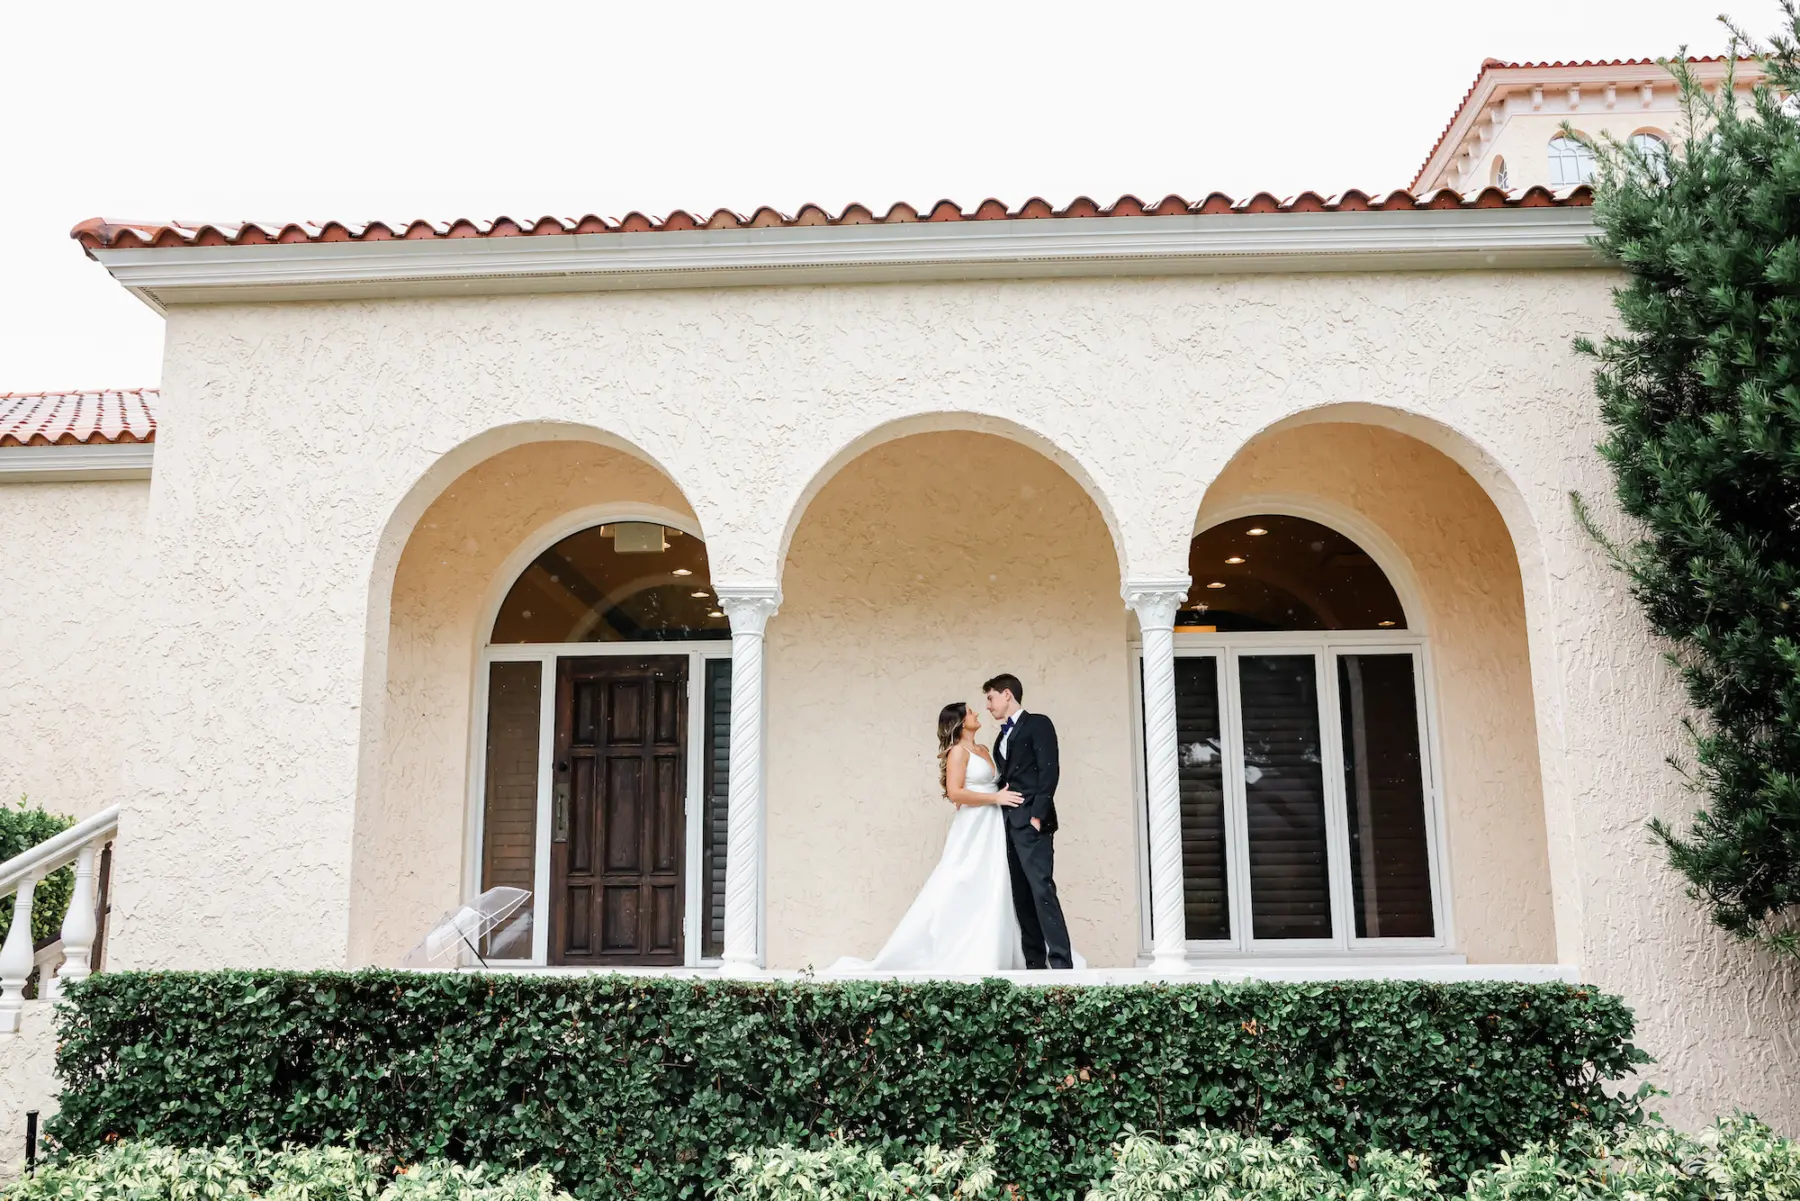 Bride and Groom First Look Wedding Portrait | Tampa Bay Event Venue Mision Lago Estate | Photographer Lifelong Photography